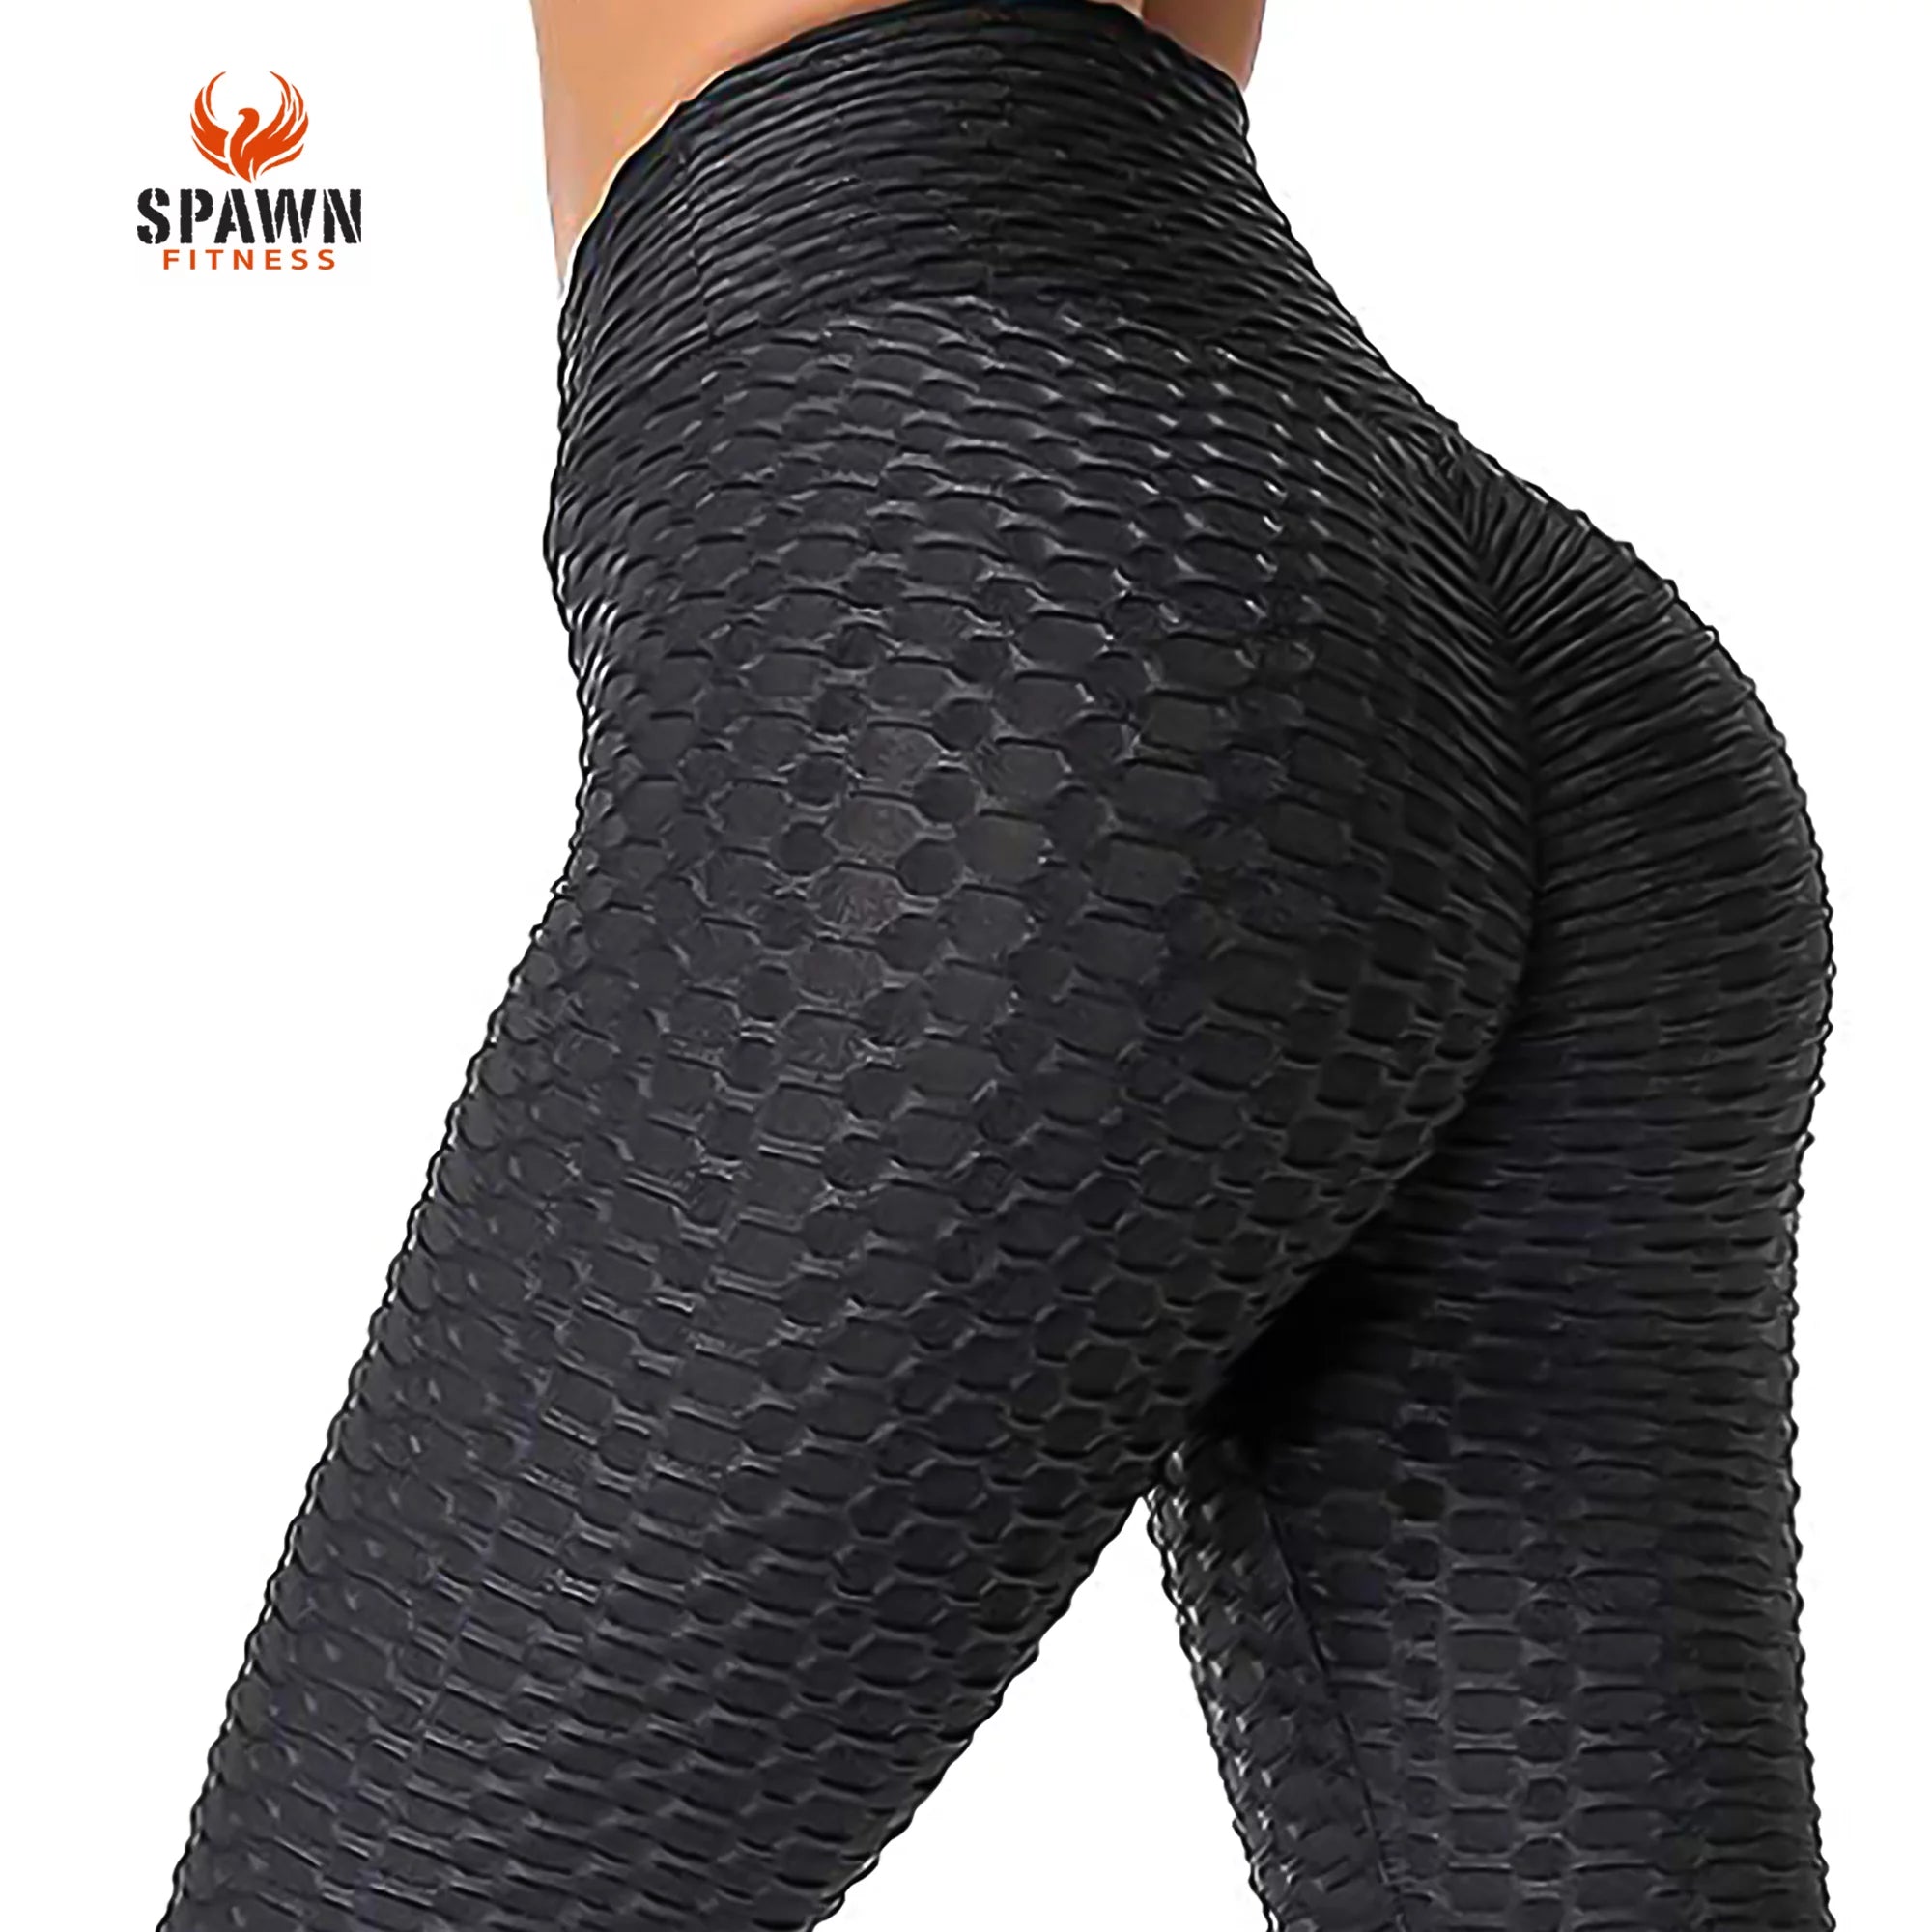 What Are The Best Scrunch Bum Leggings  International Society of Precision  Agriculture